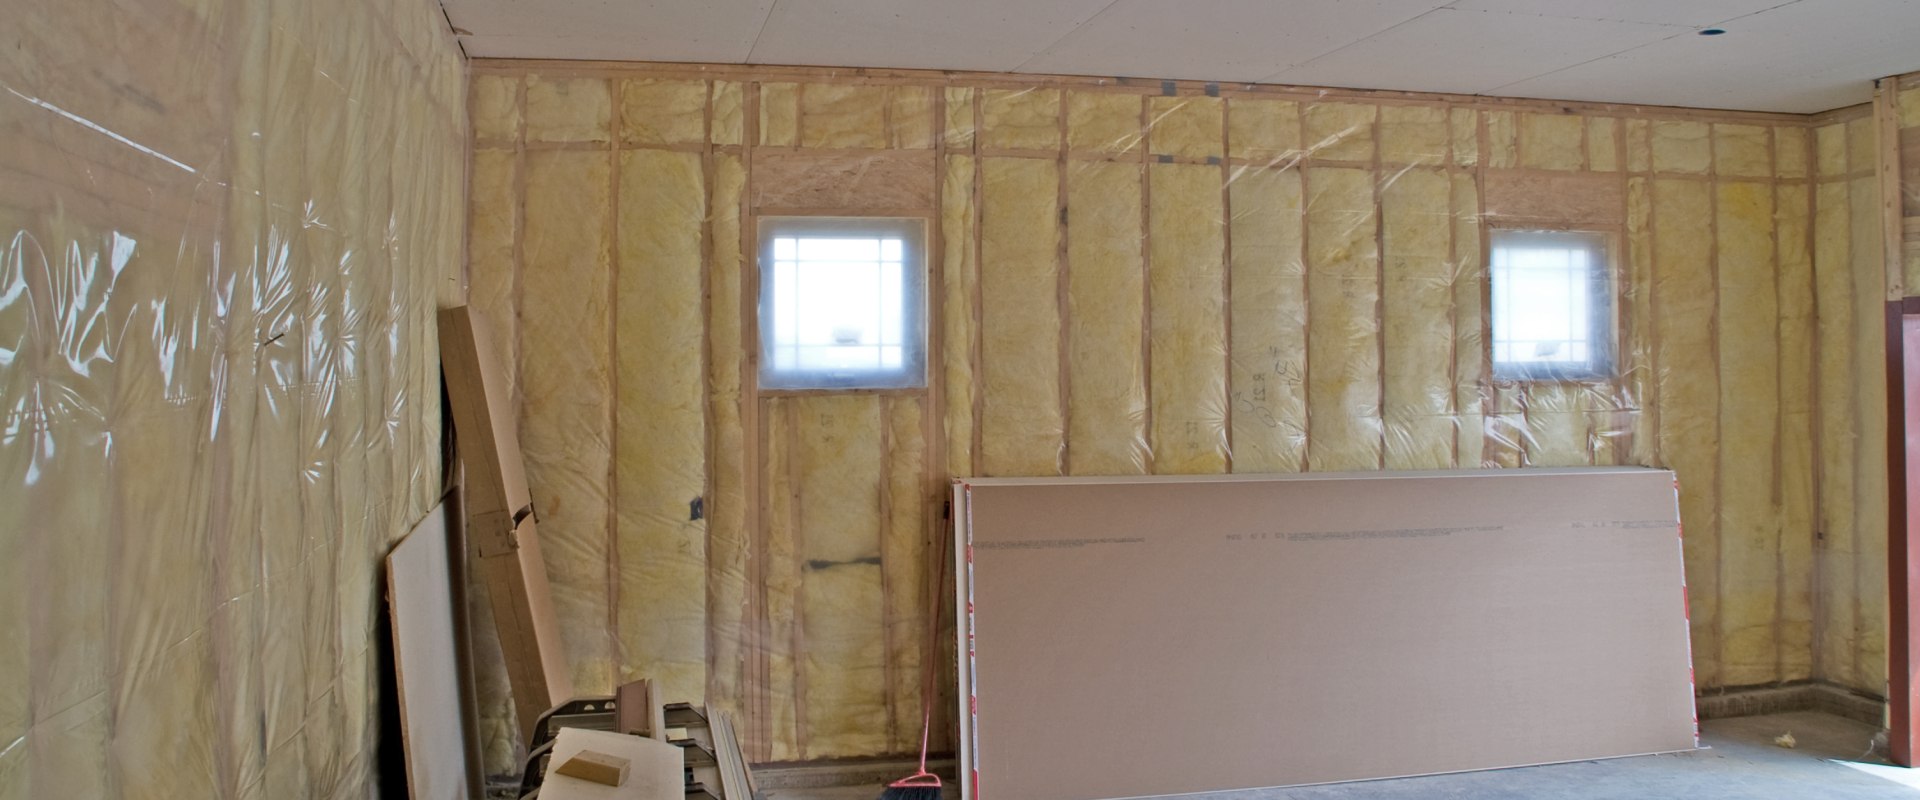 Insulating a Finished, Heated Space: What You Need to Know